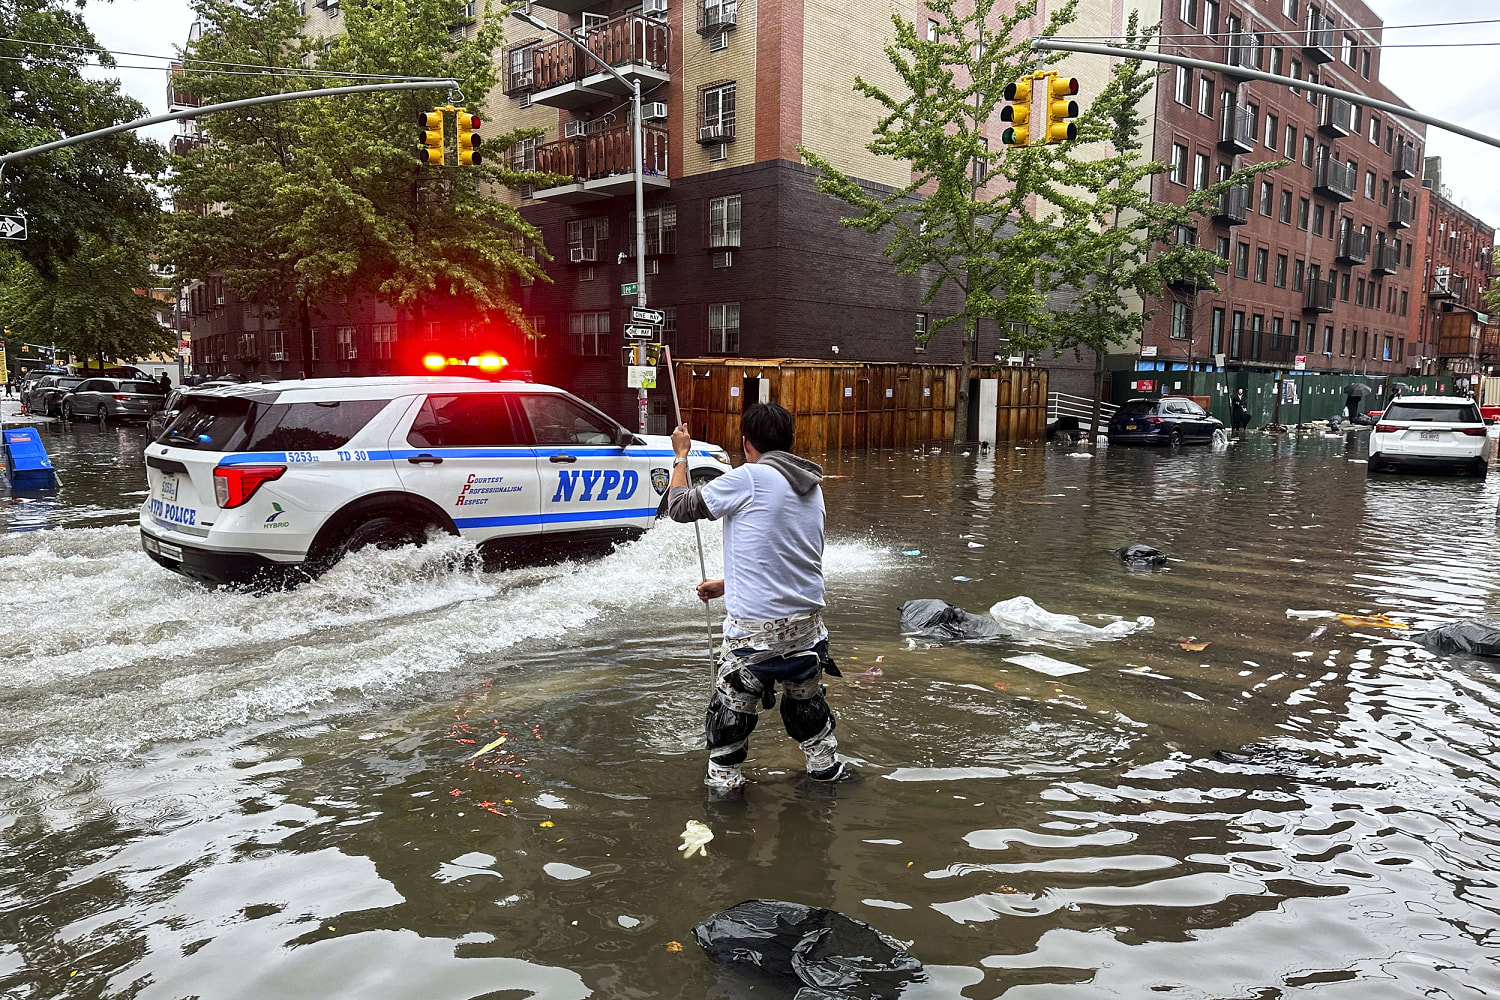 New York officials warn of heavy rain in New York after widespread criticism of handling of flash flooding